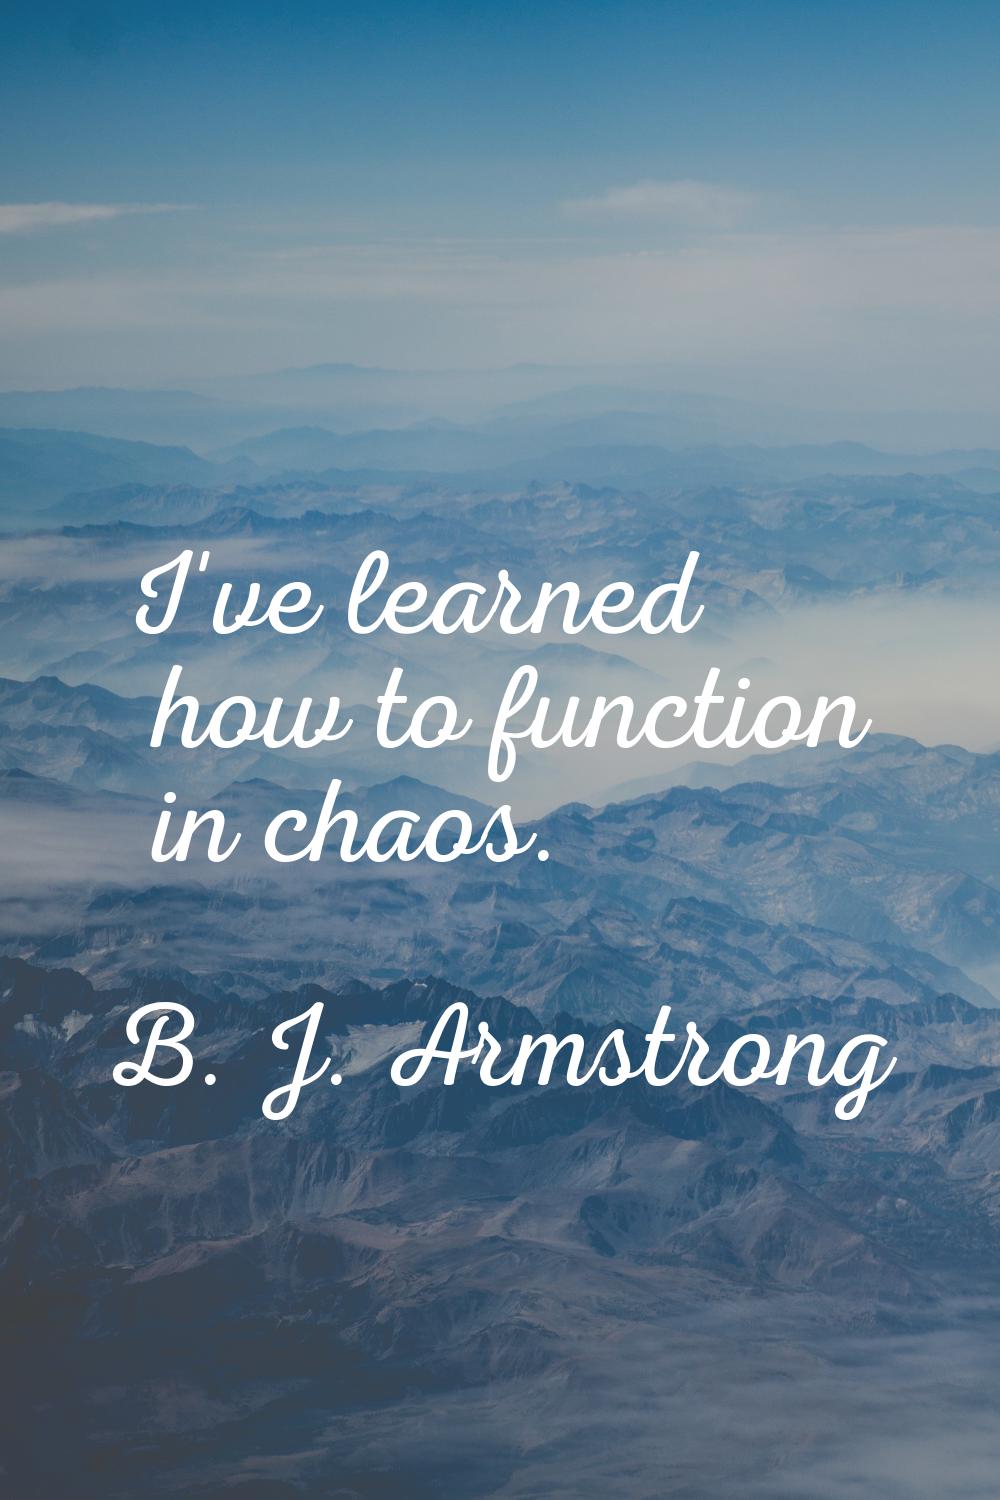 I've learned how to function in chaos.